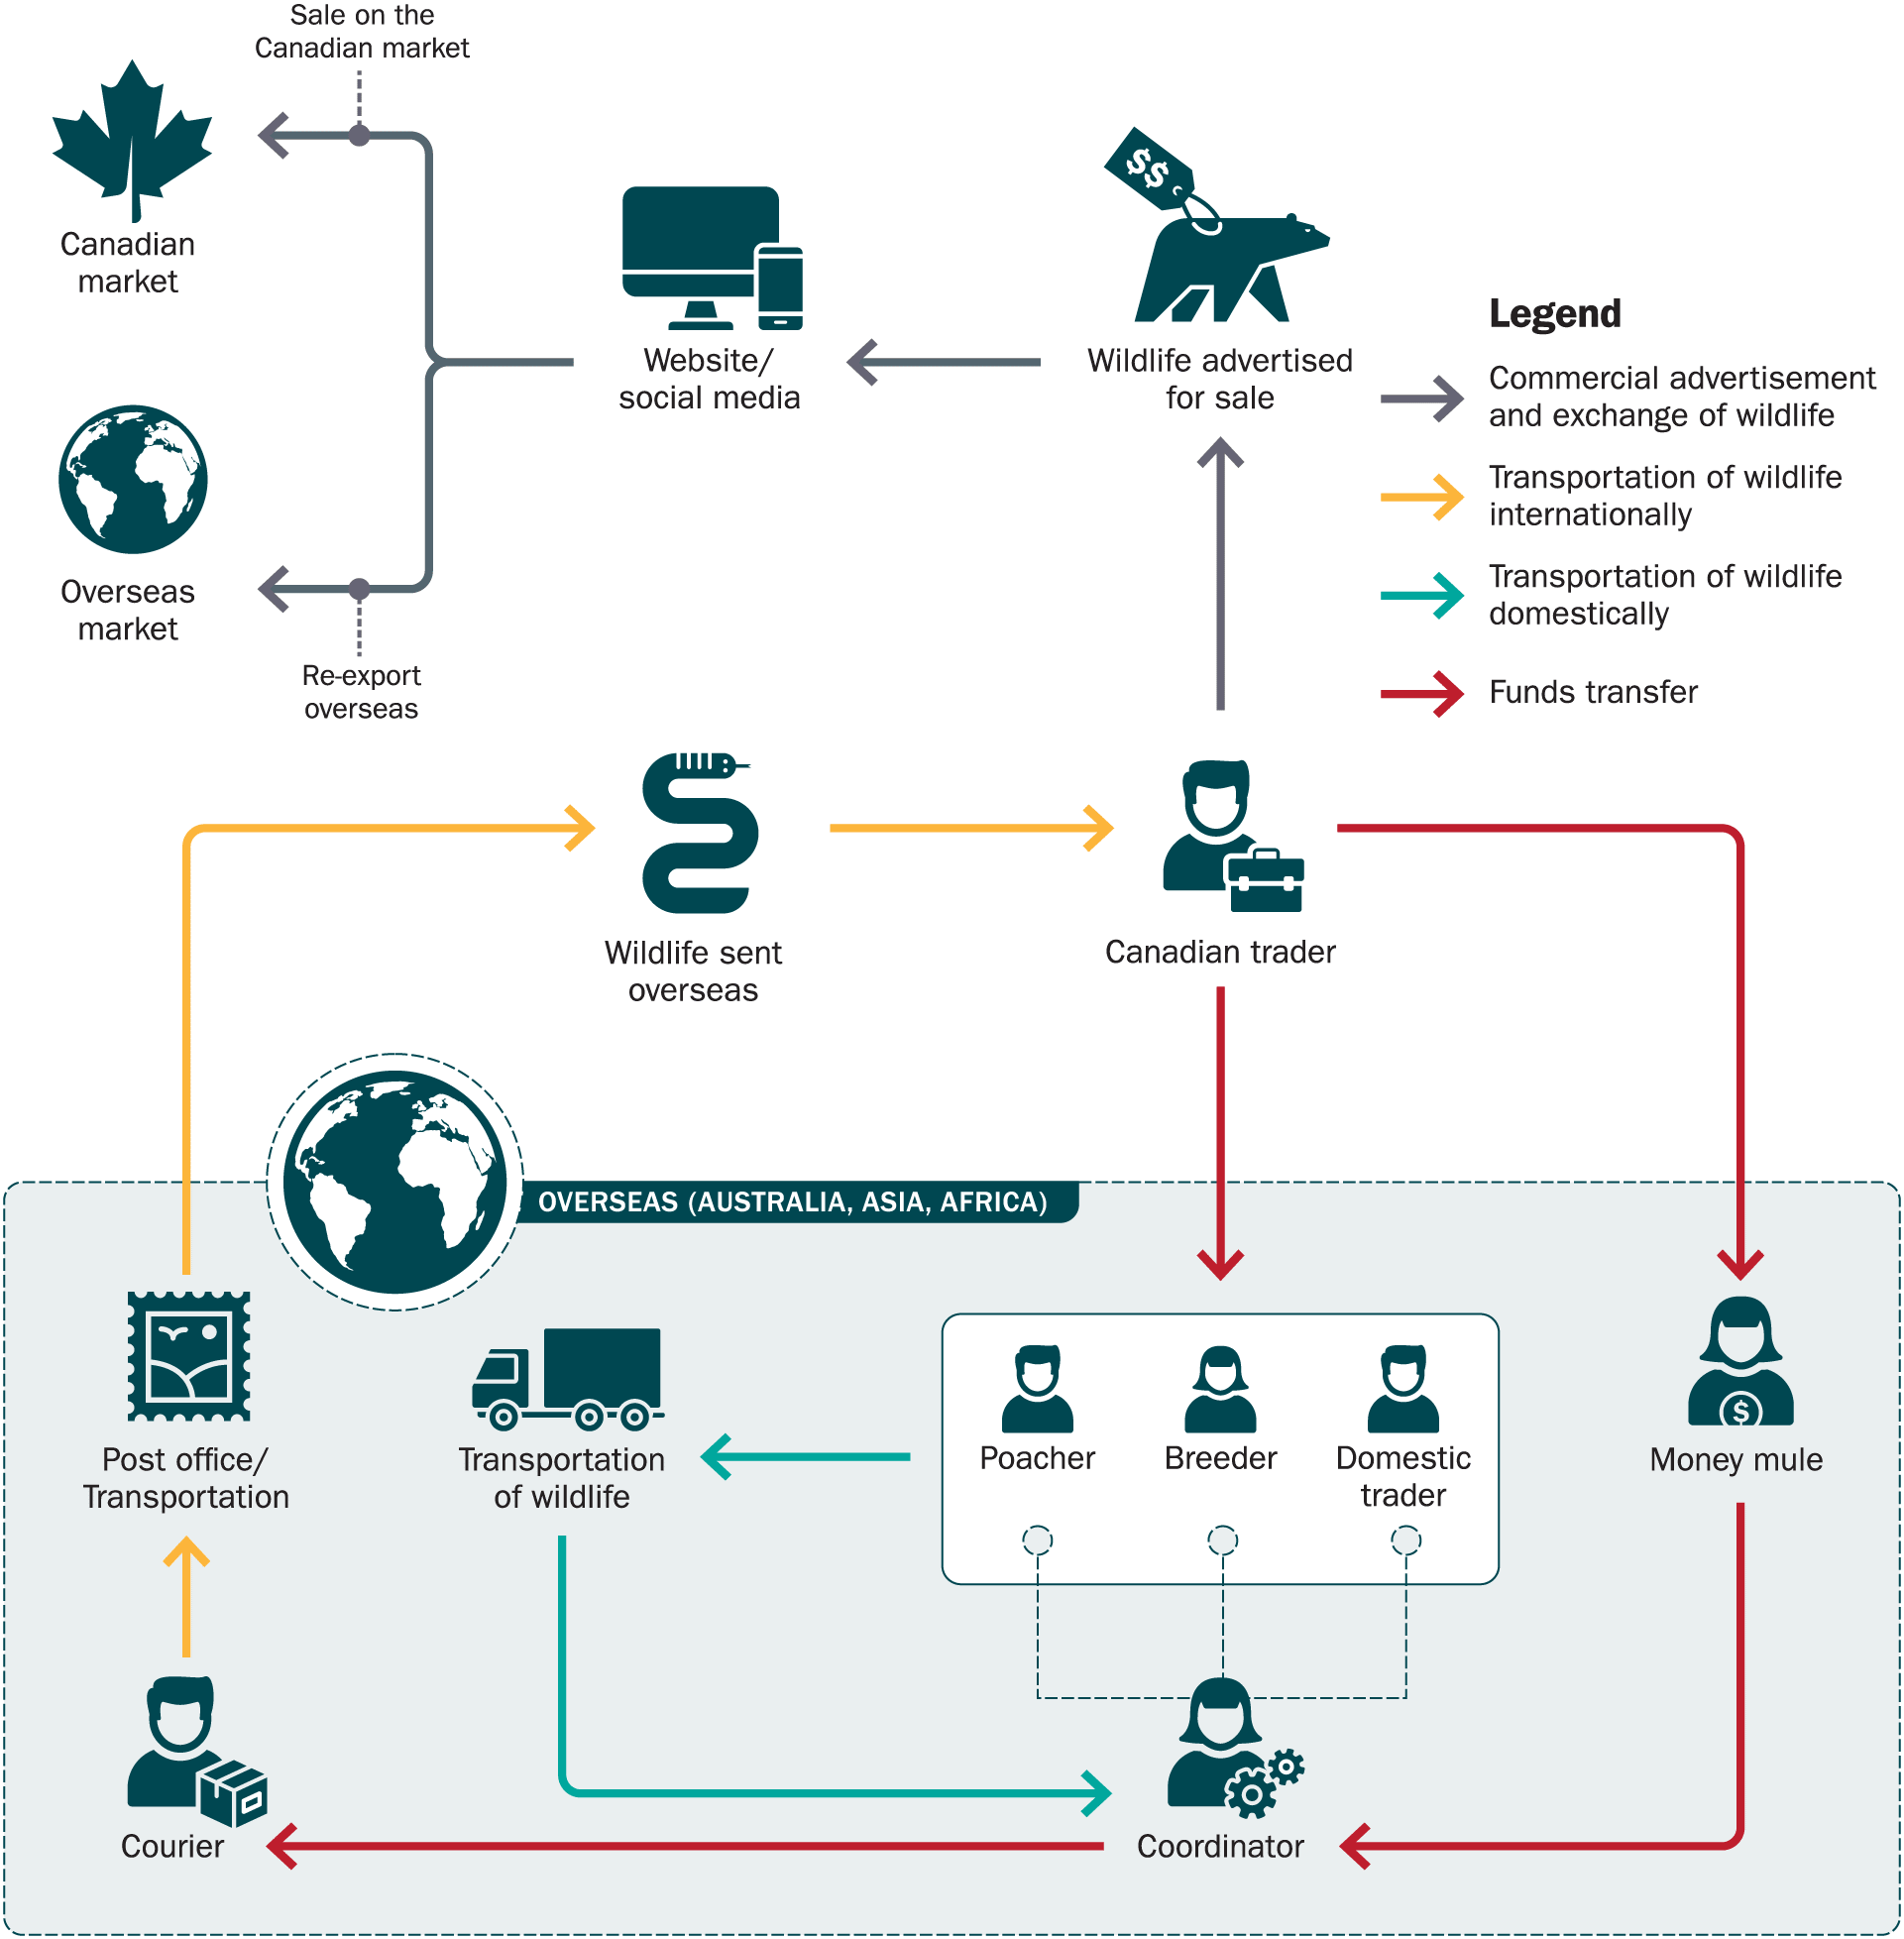 Network of individuals and their physical, coordinating and/or financial role in the illegal importation of exotic wildlife.